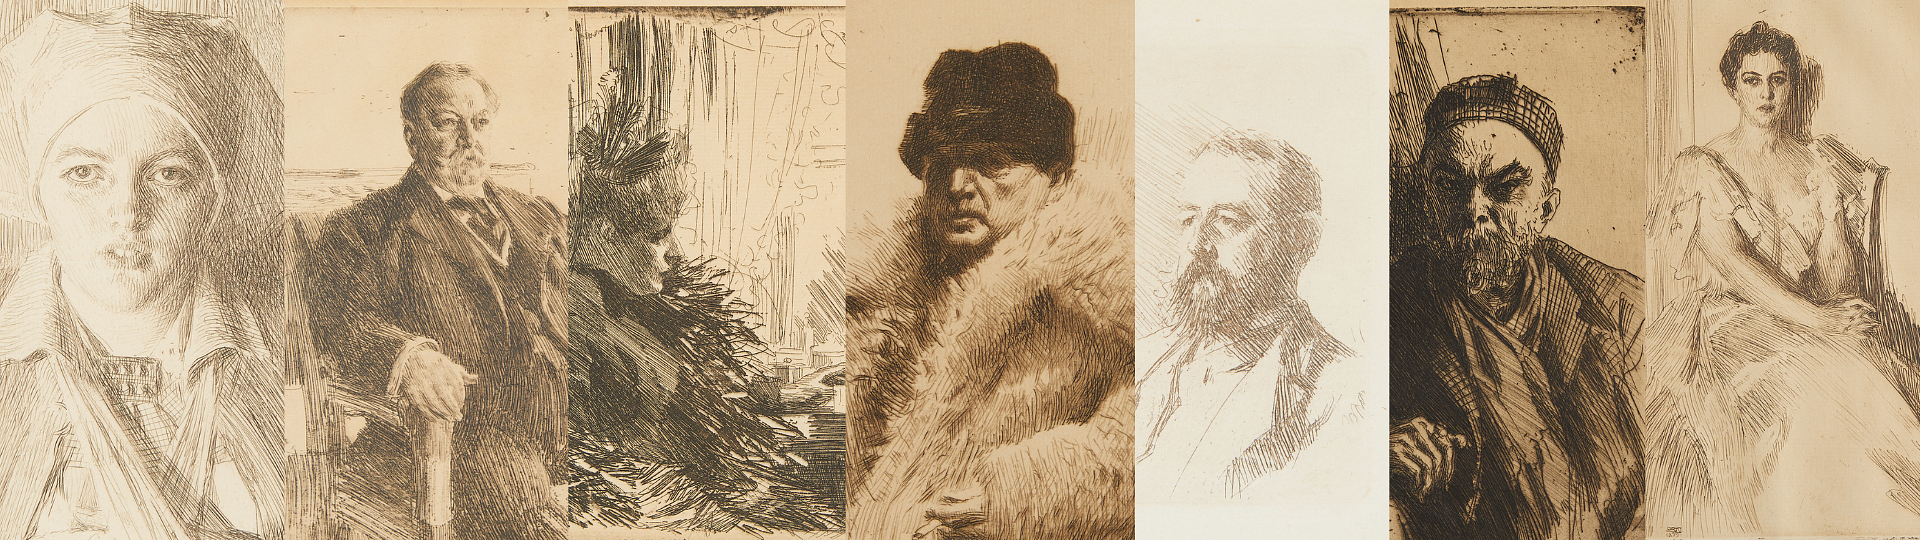 Anders Zorn: A Lifetime of Etchings  by Revere Auctions